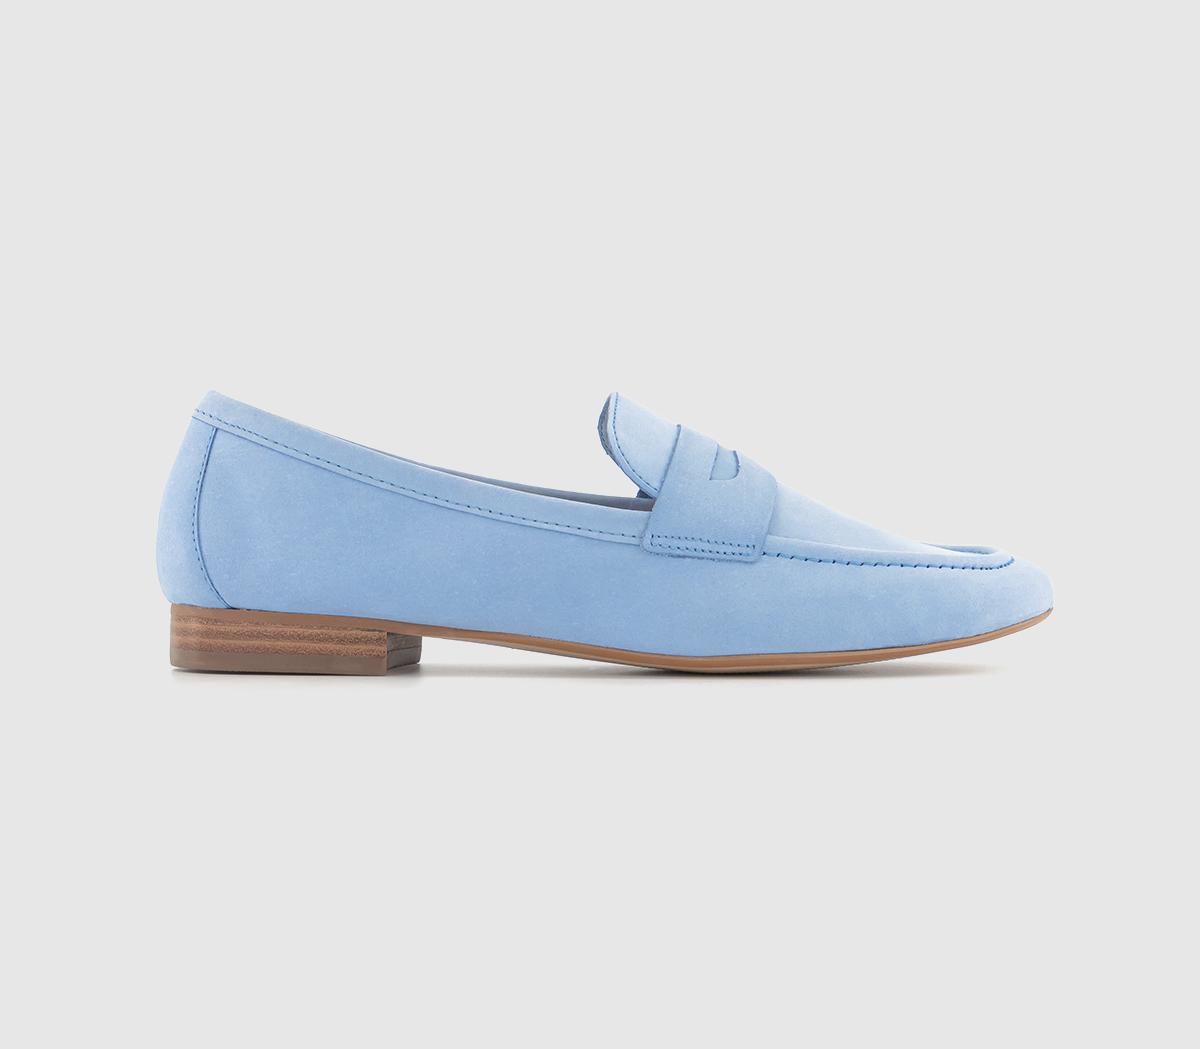 OFFICEFreedom  Penny LoafersPale Blue Nubuck